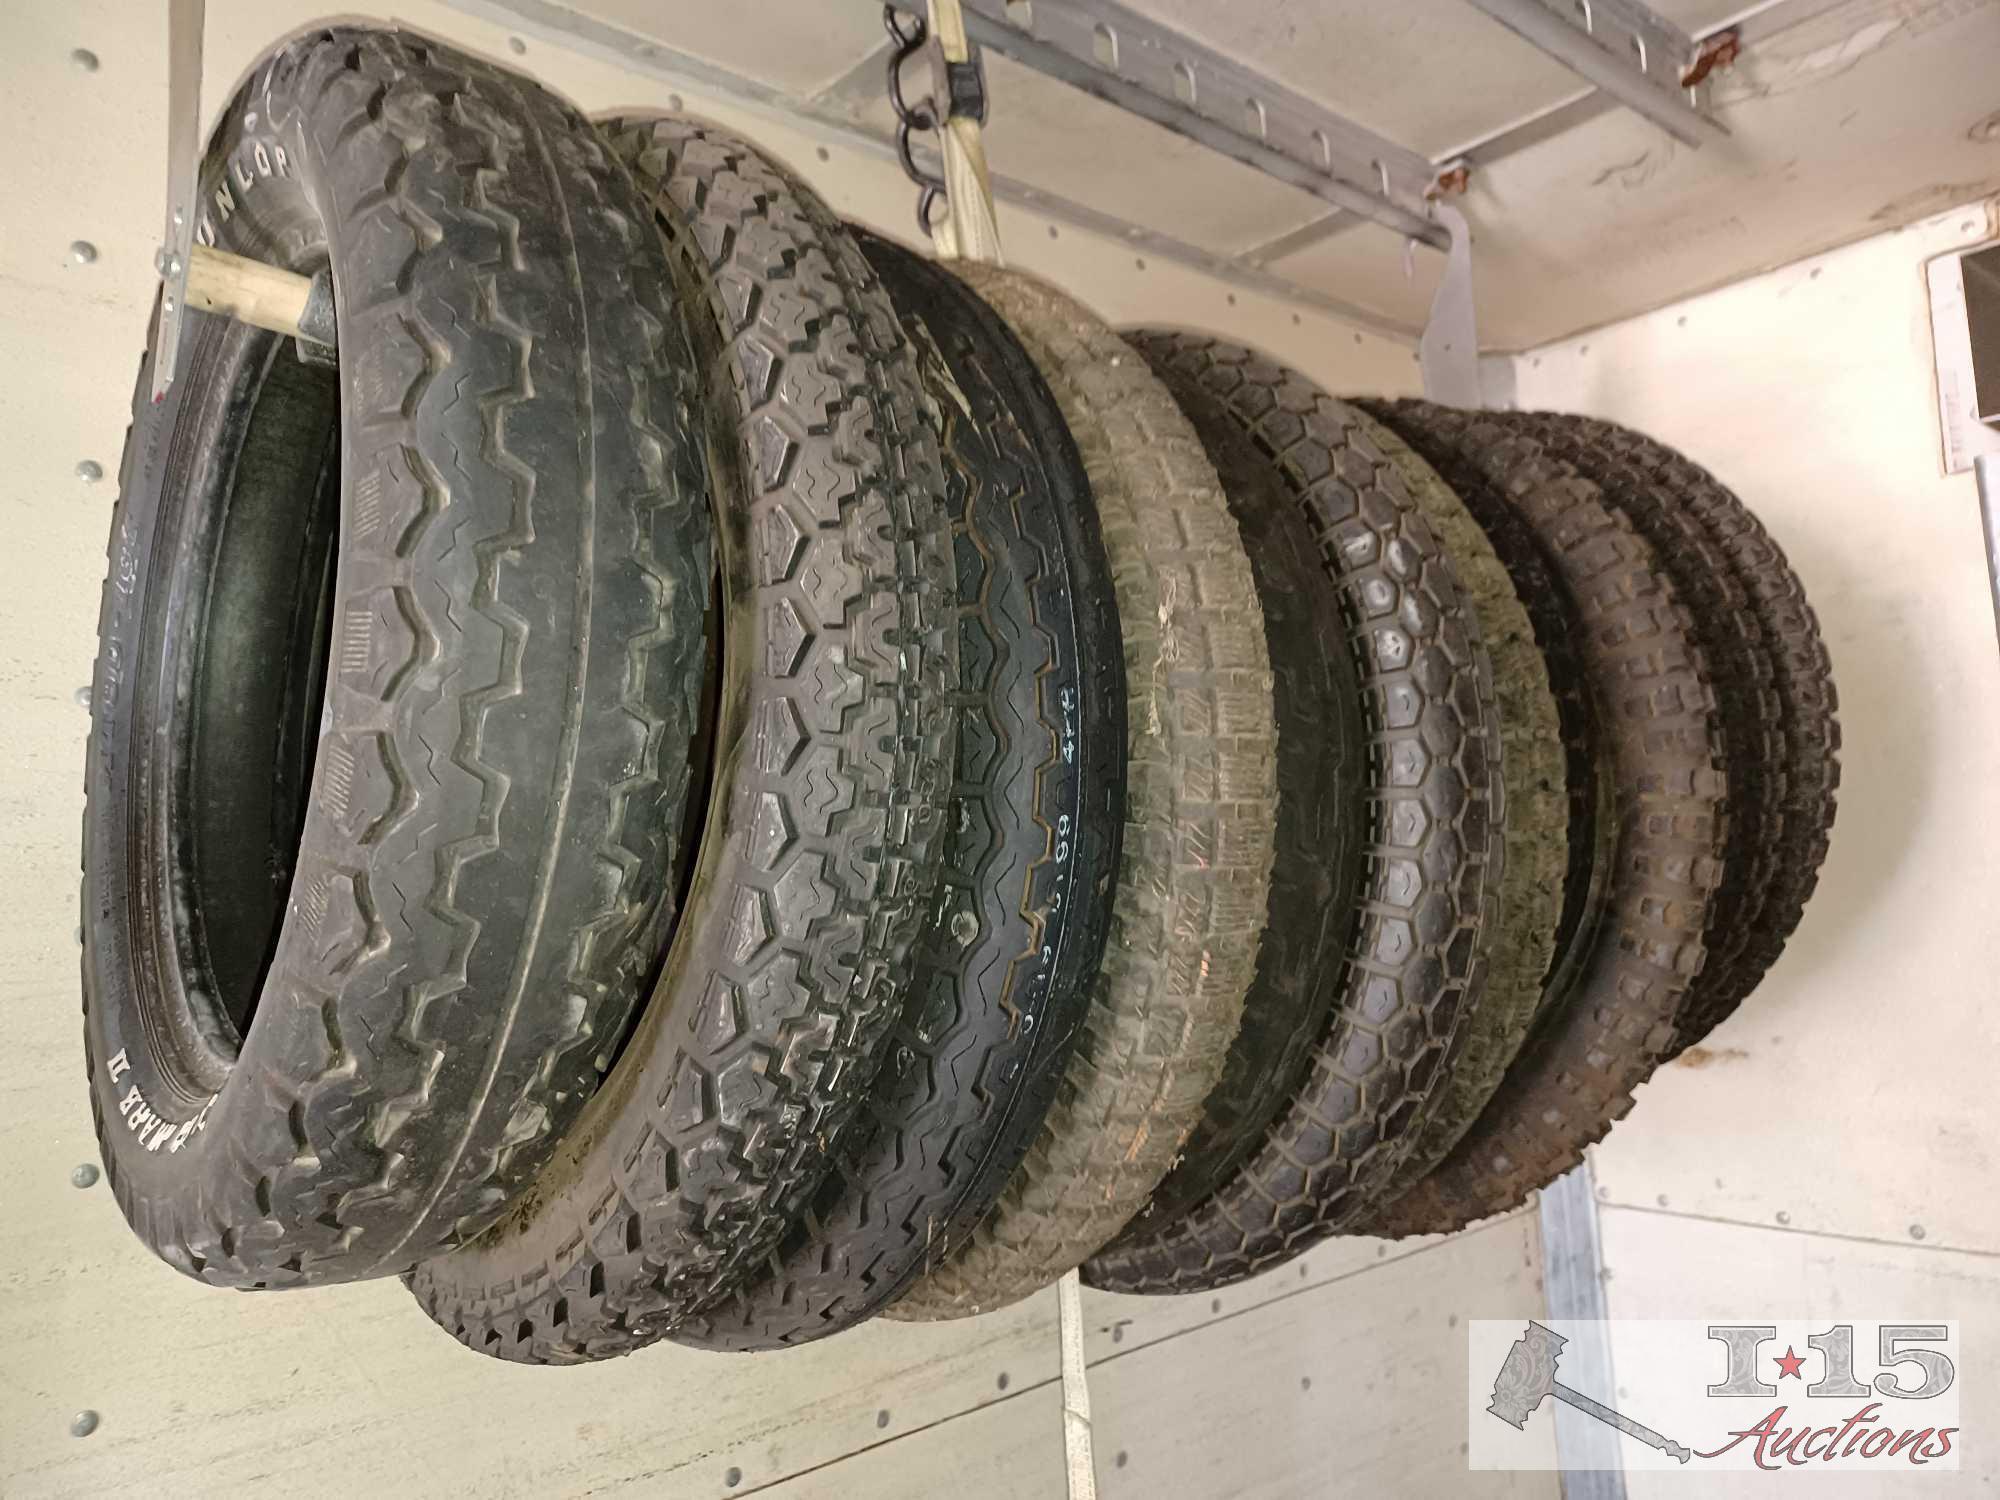 Approximately Twelve Motorcycle Tires